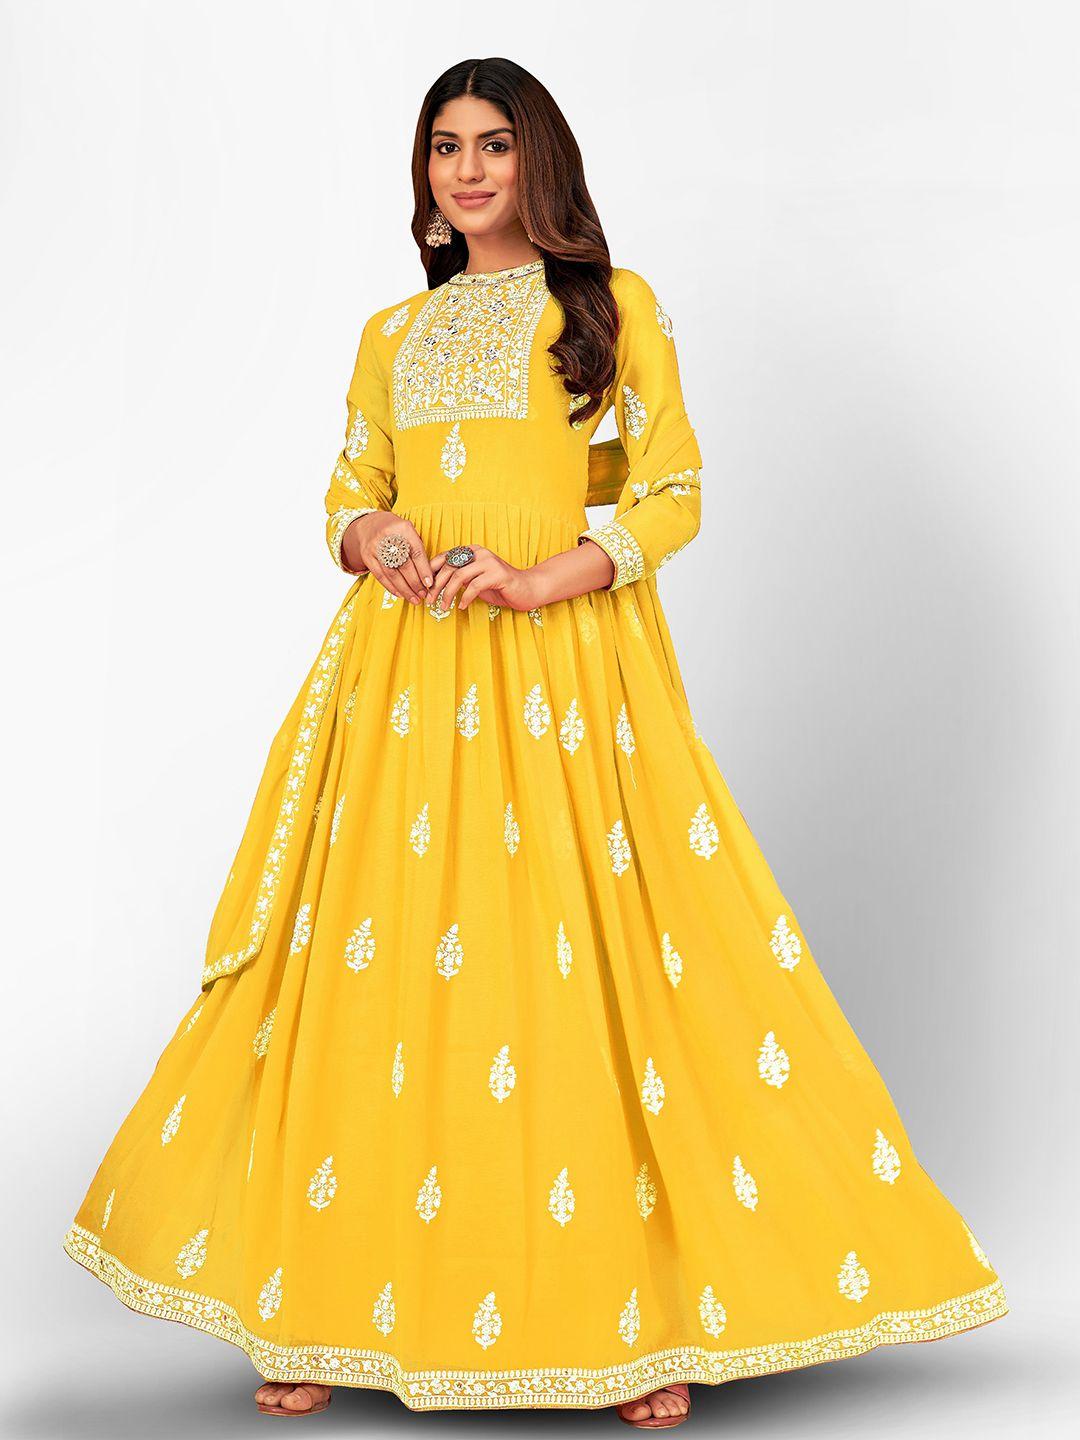 Divine International Trading Co Yellow & White Embroidered Unstitched Dress Material